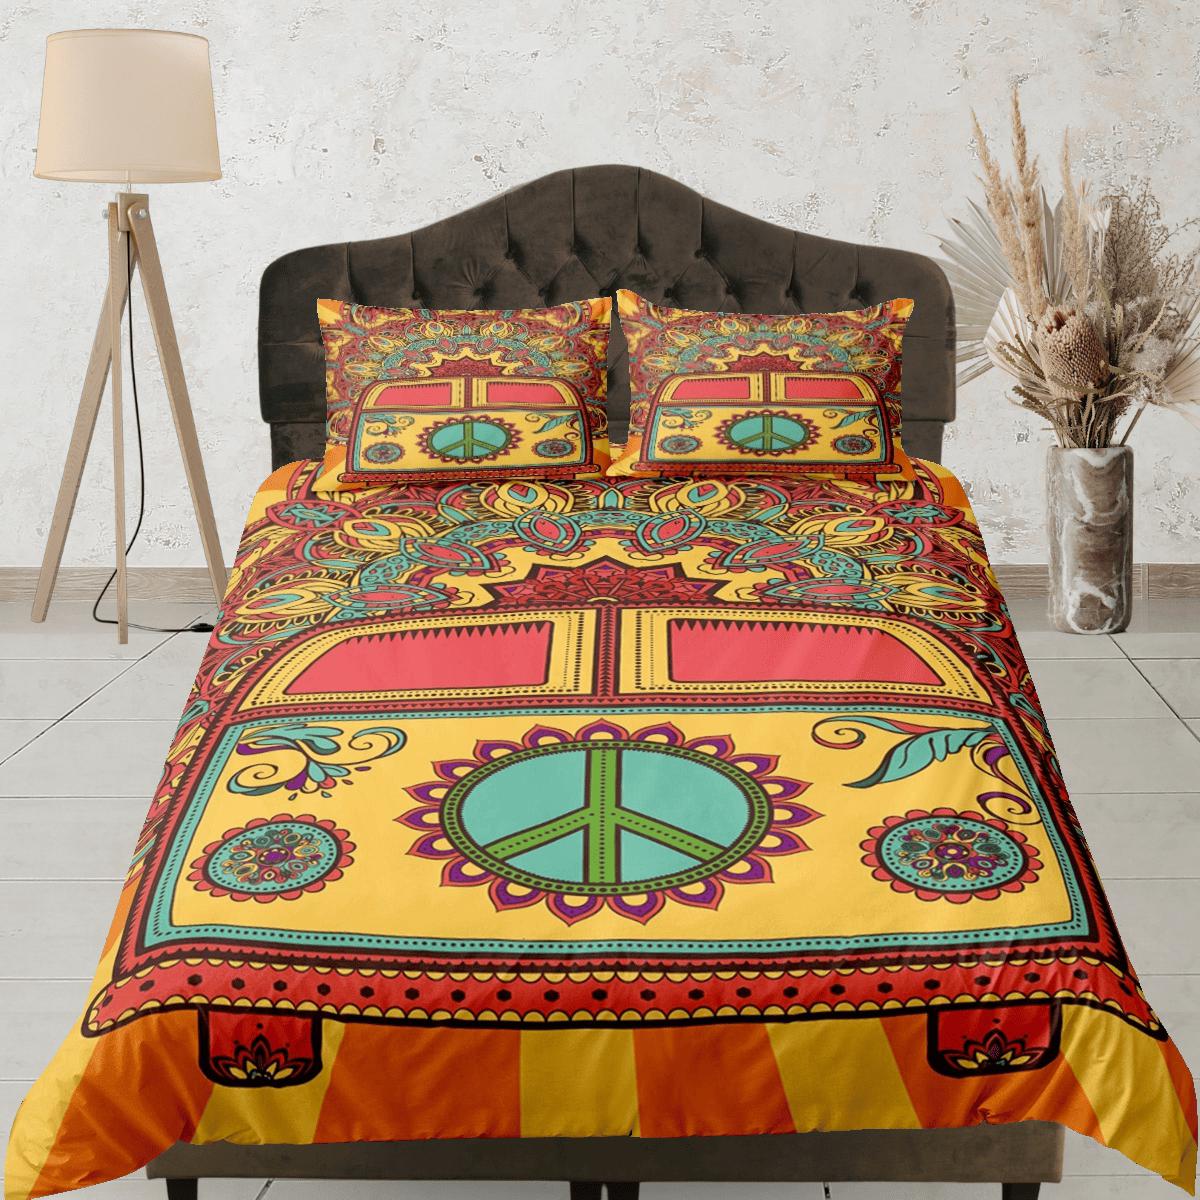 daintyduvet Bus with peace sign 90s nostalgia hippie bedding orange retro duvet cover set, colorful bedding teens and adult duvet cover maximalist decor